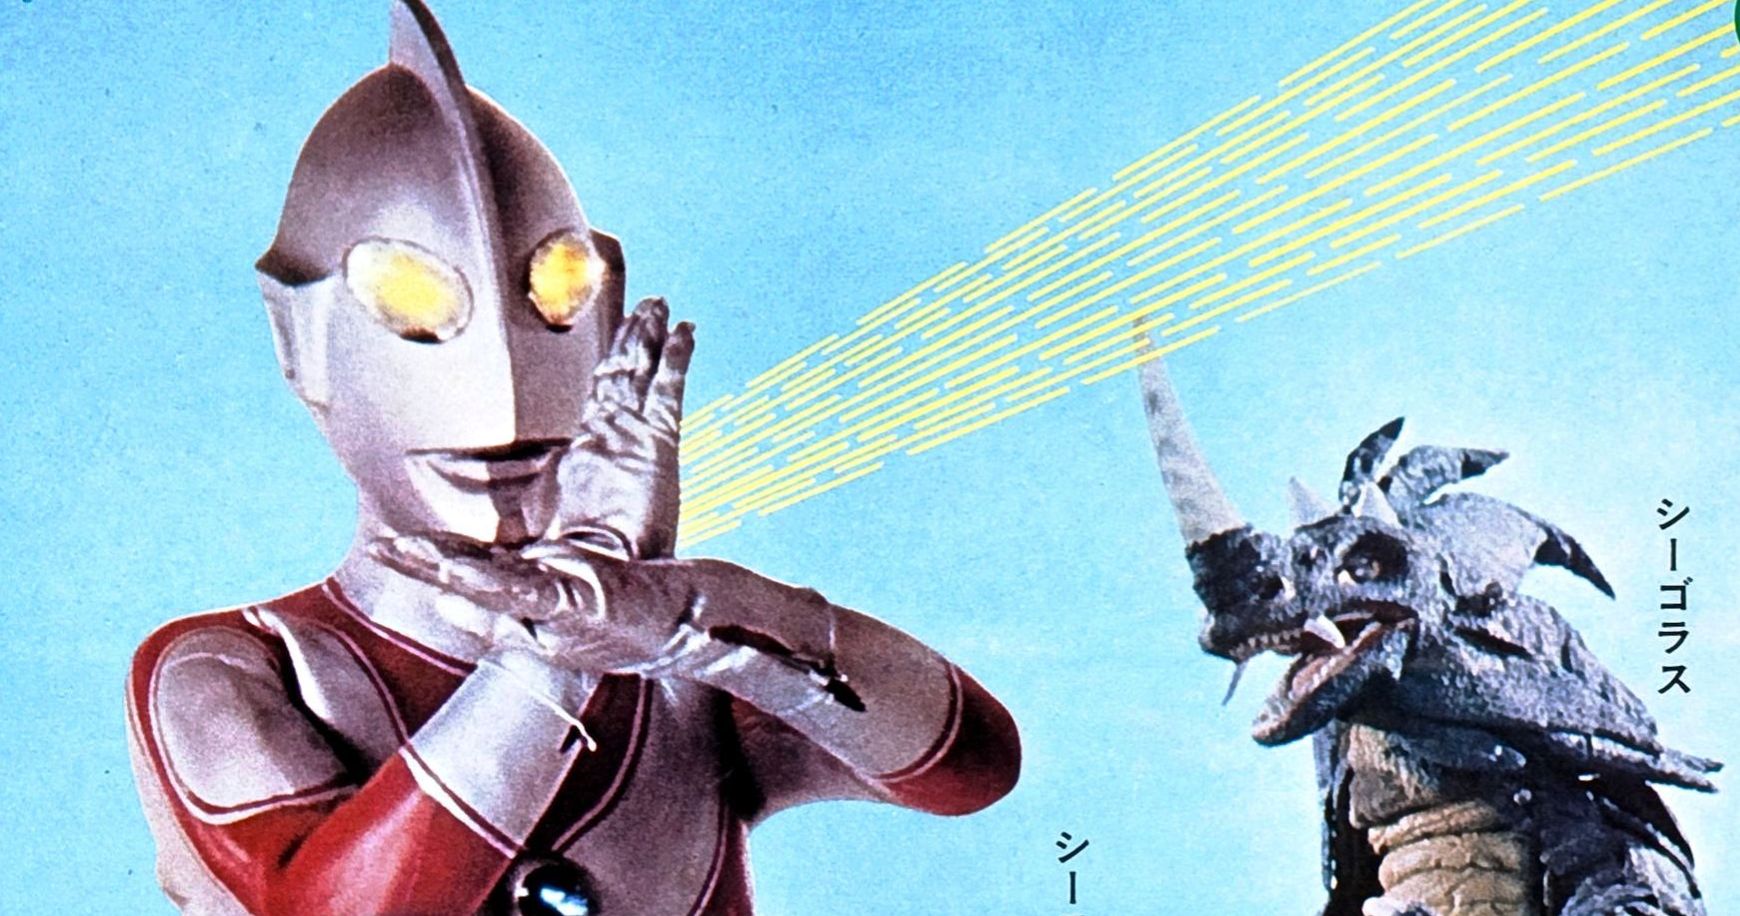 Ultraman and Ultra Q Complete Series Blu-ray Releases Coming in October